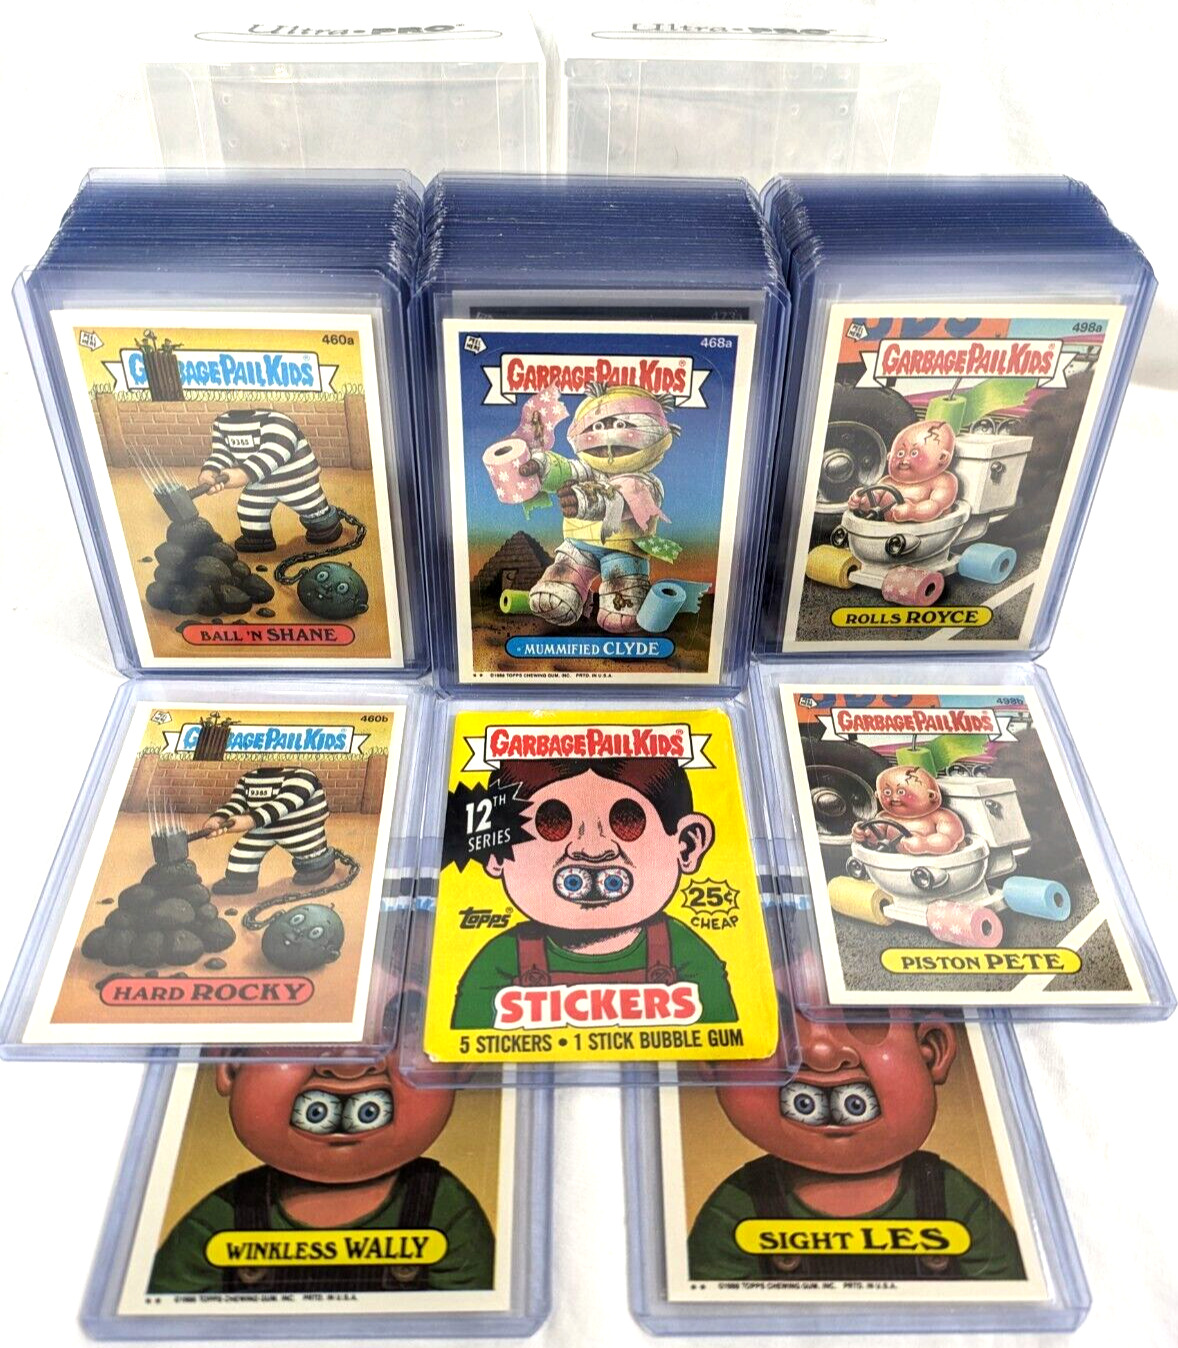 1988 Topps Garbage Pail Kids 12th Series OS12 MINT 88 Card Set in NEW TOPLOADERS